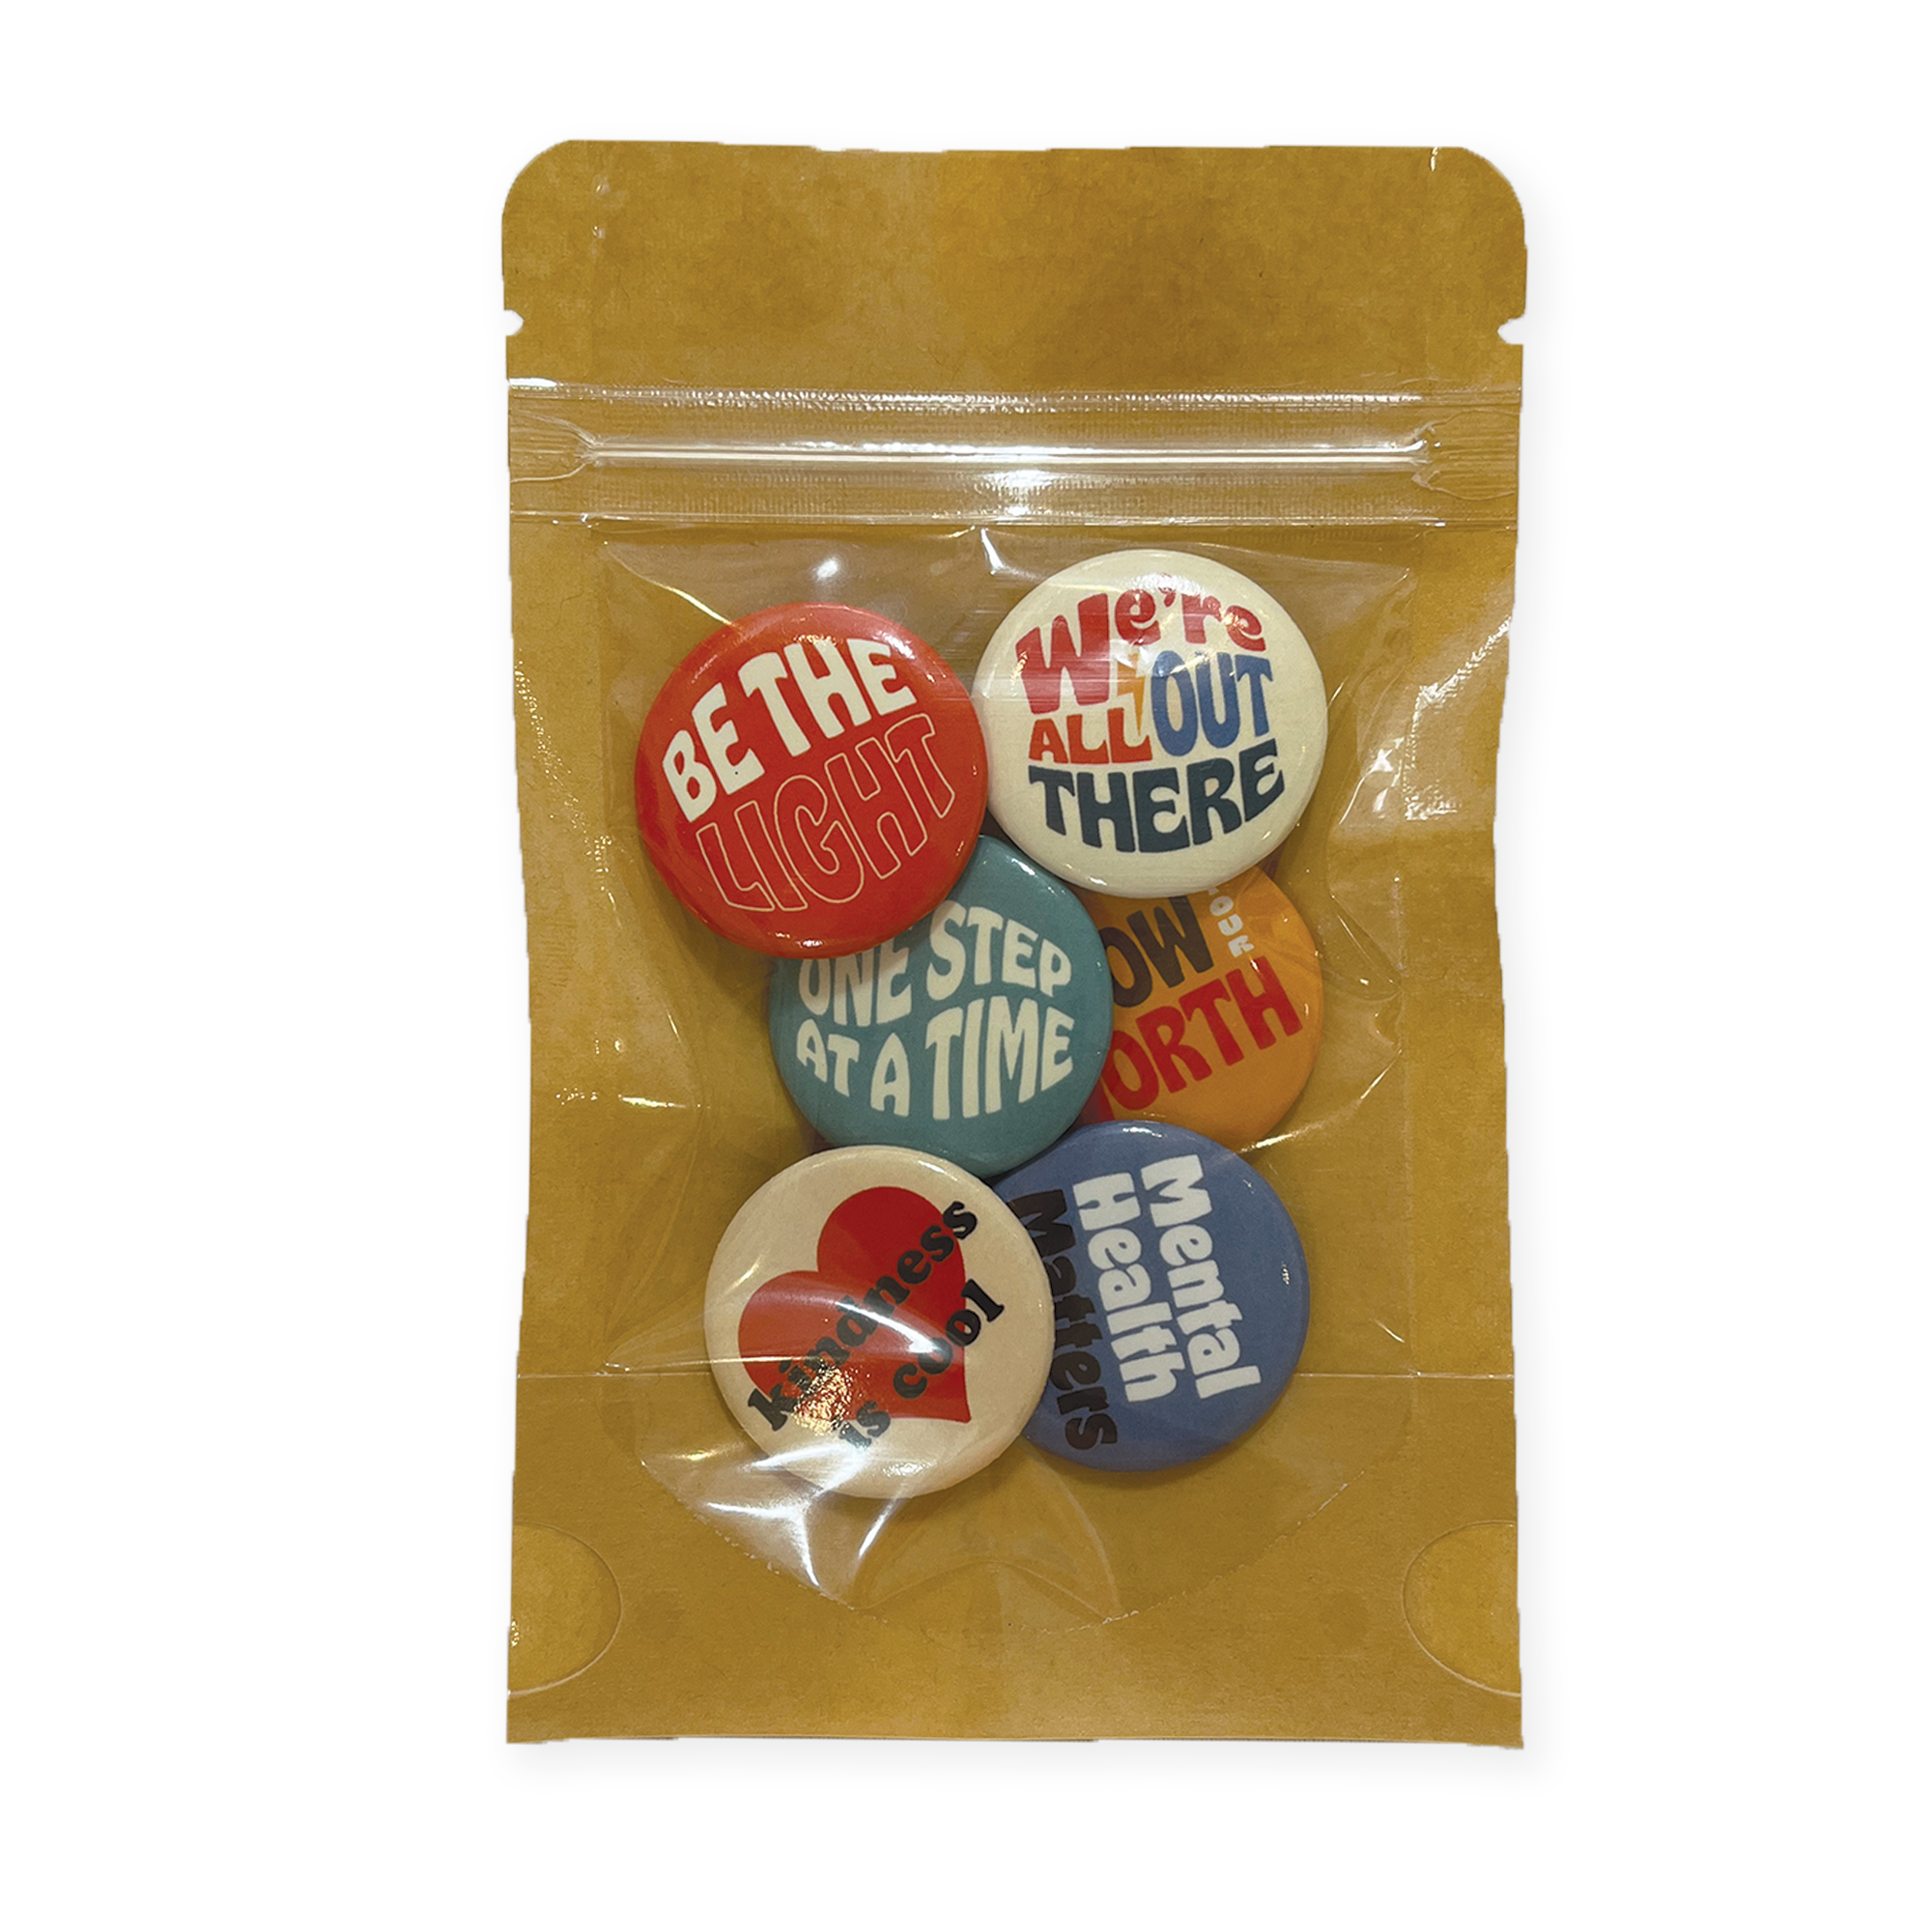 Button Pack